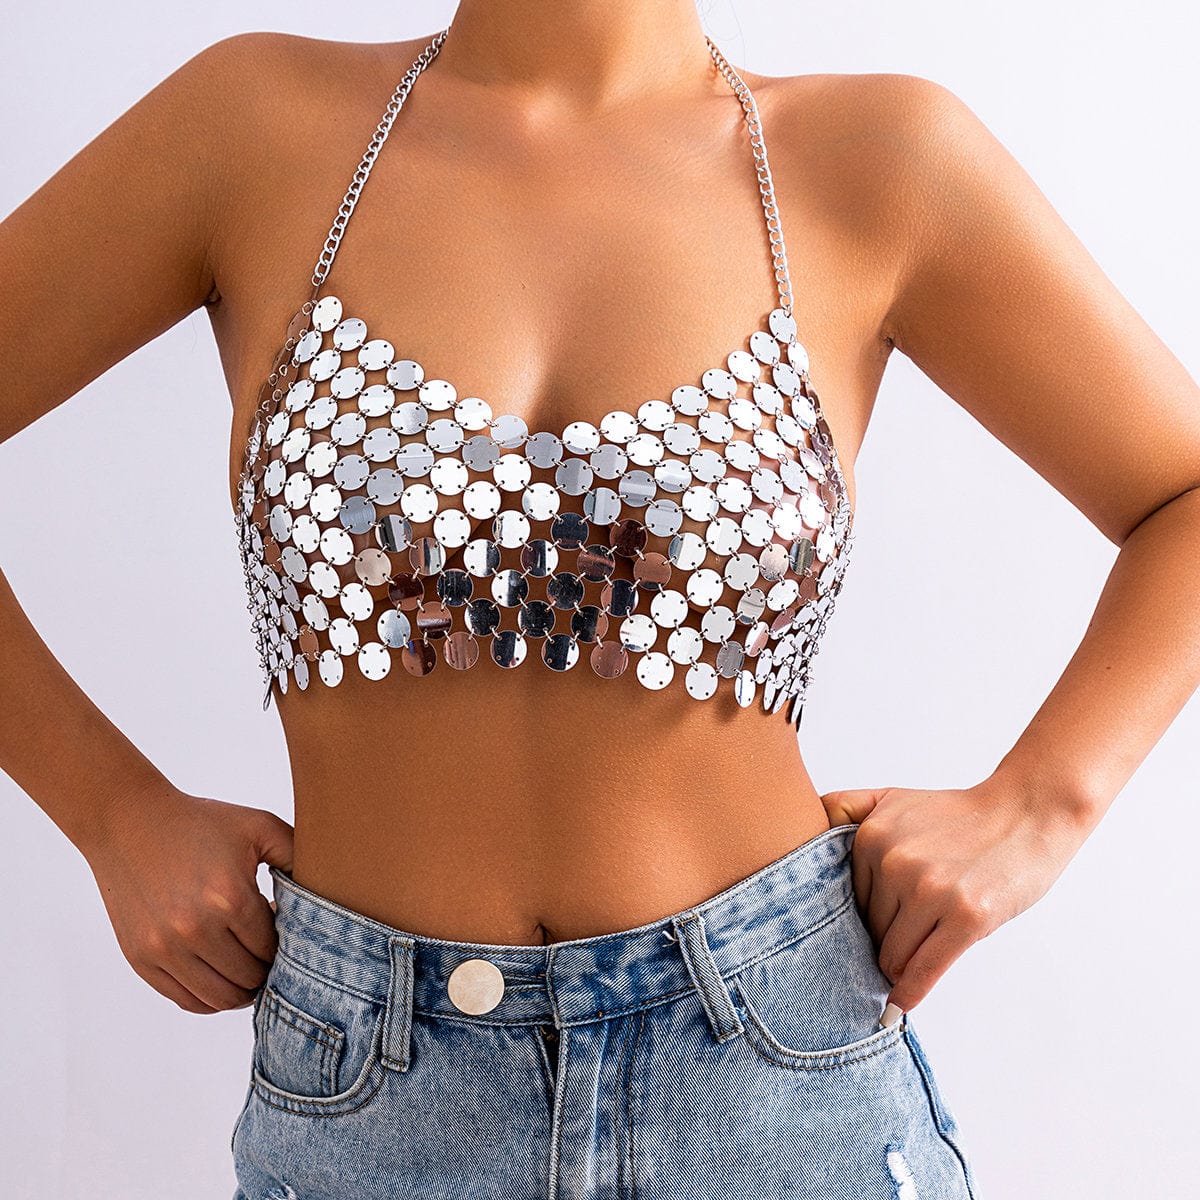 Chic Colorful Backless Sequins Bra